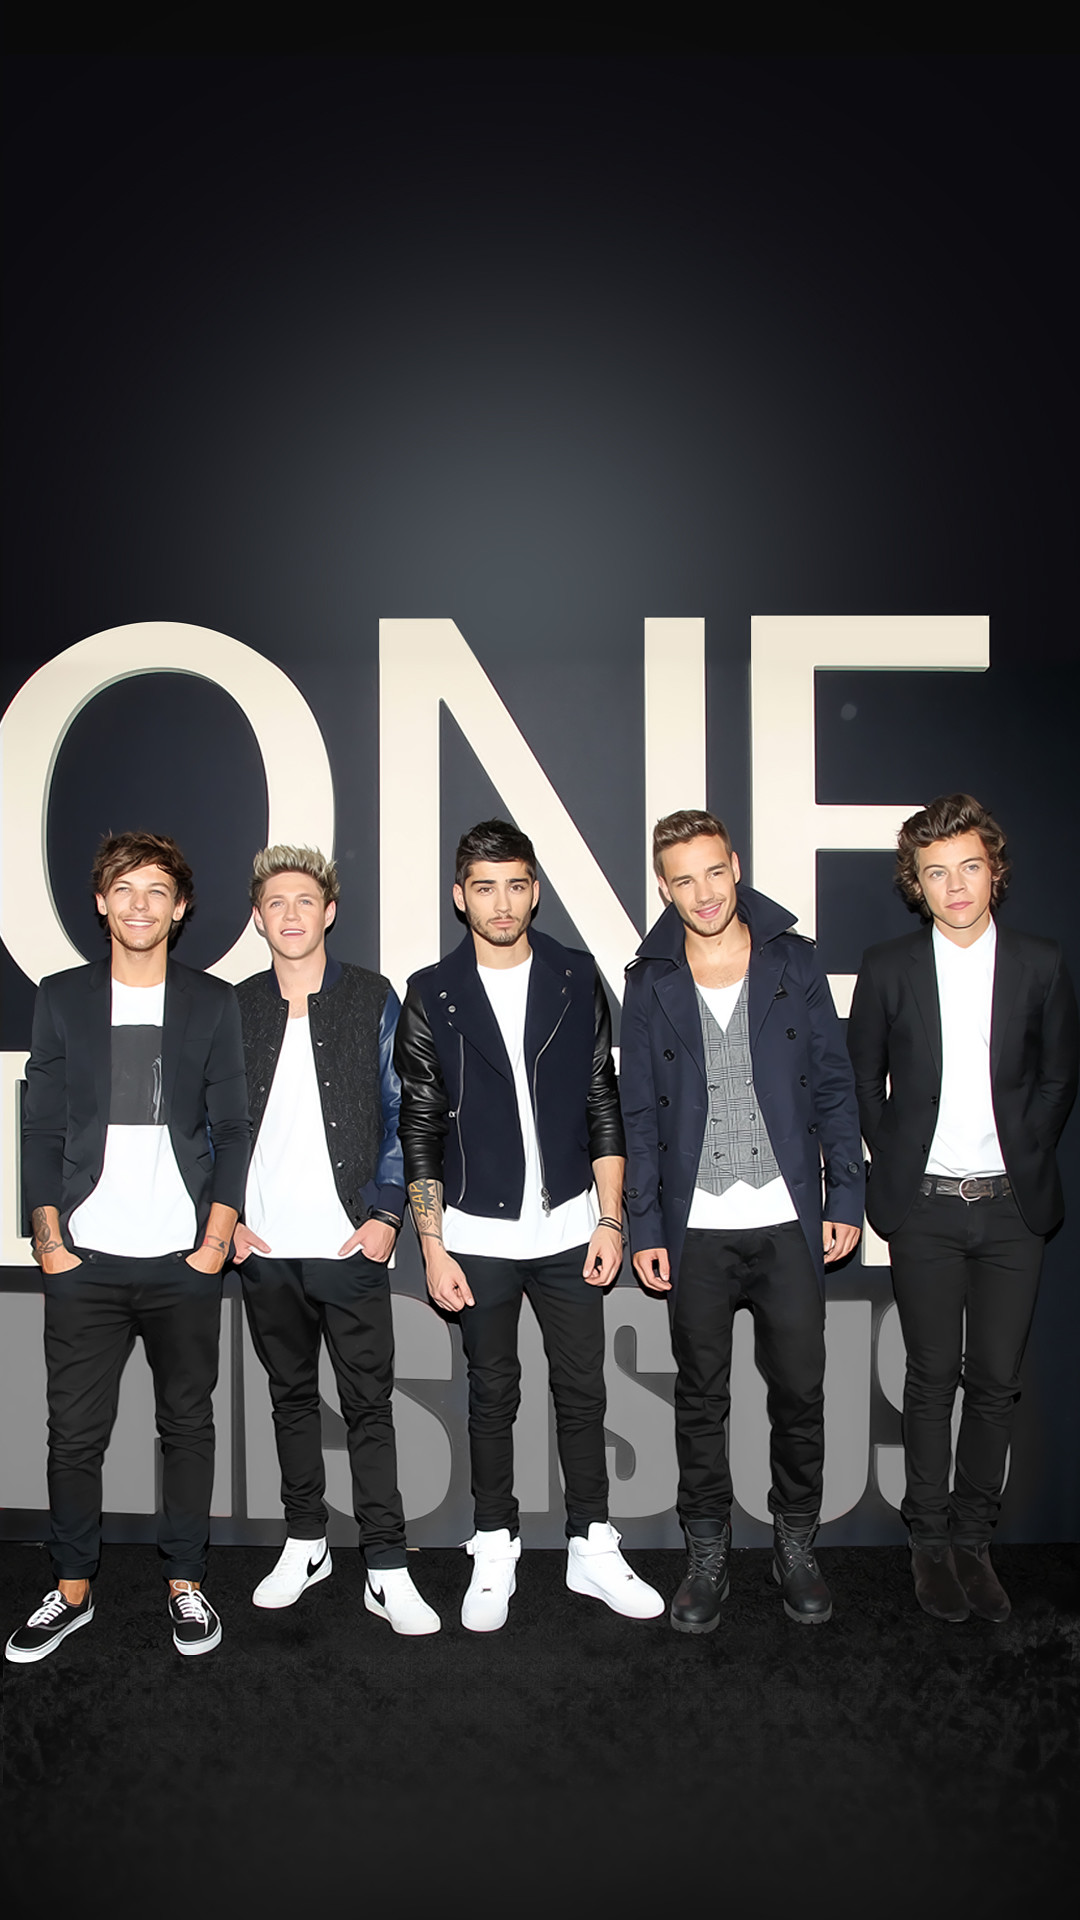 One Direction wallpaper for mobile phones … – One Direction .